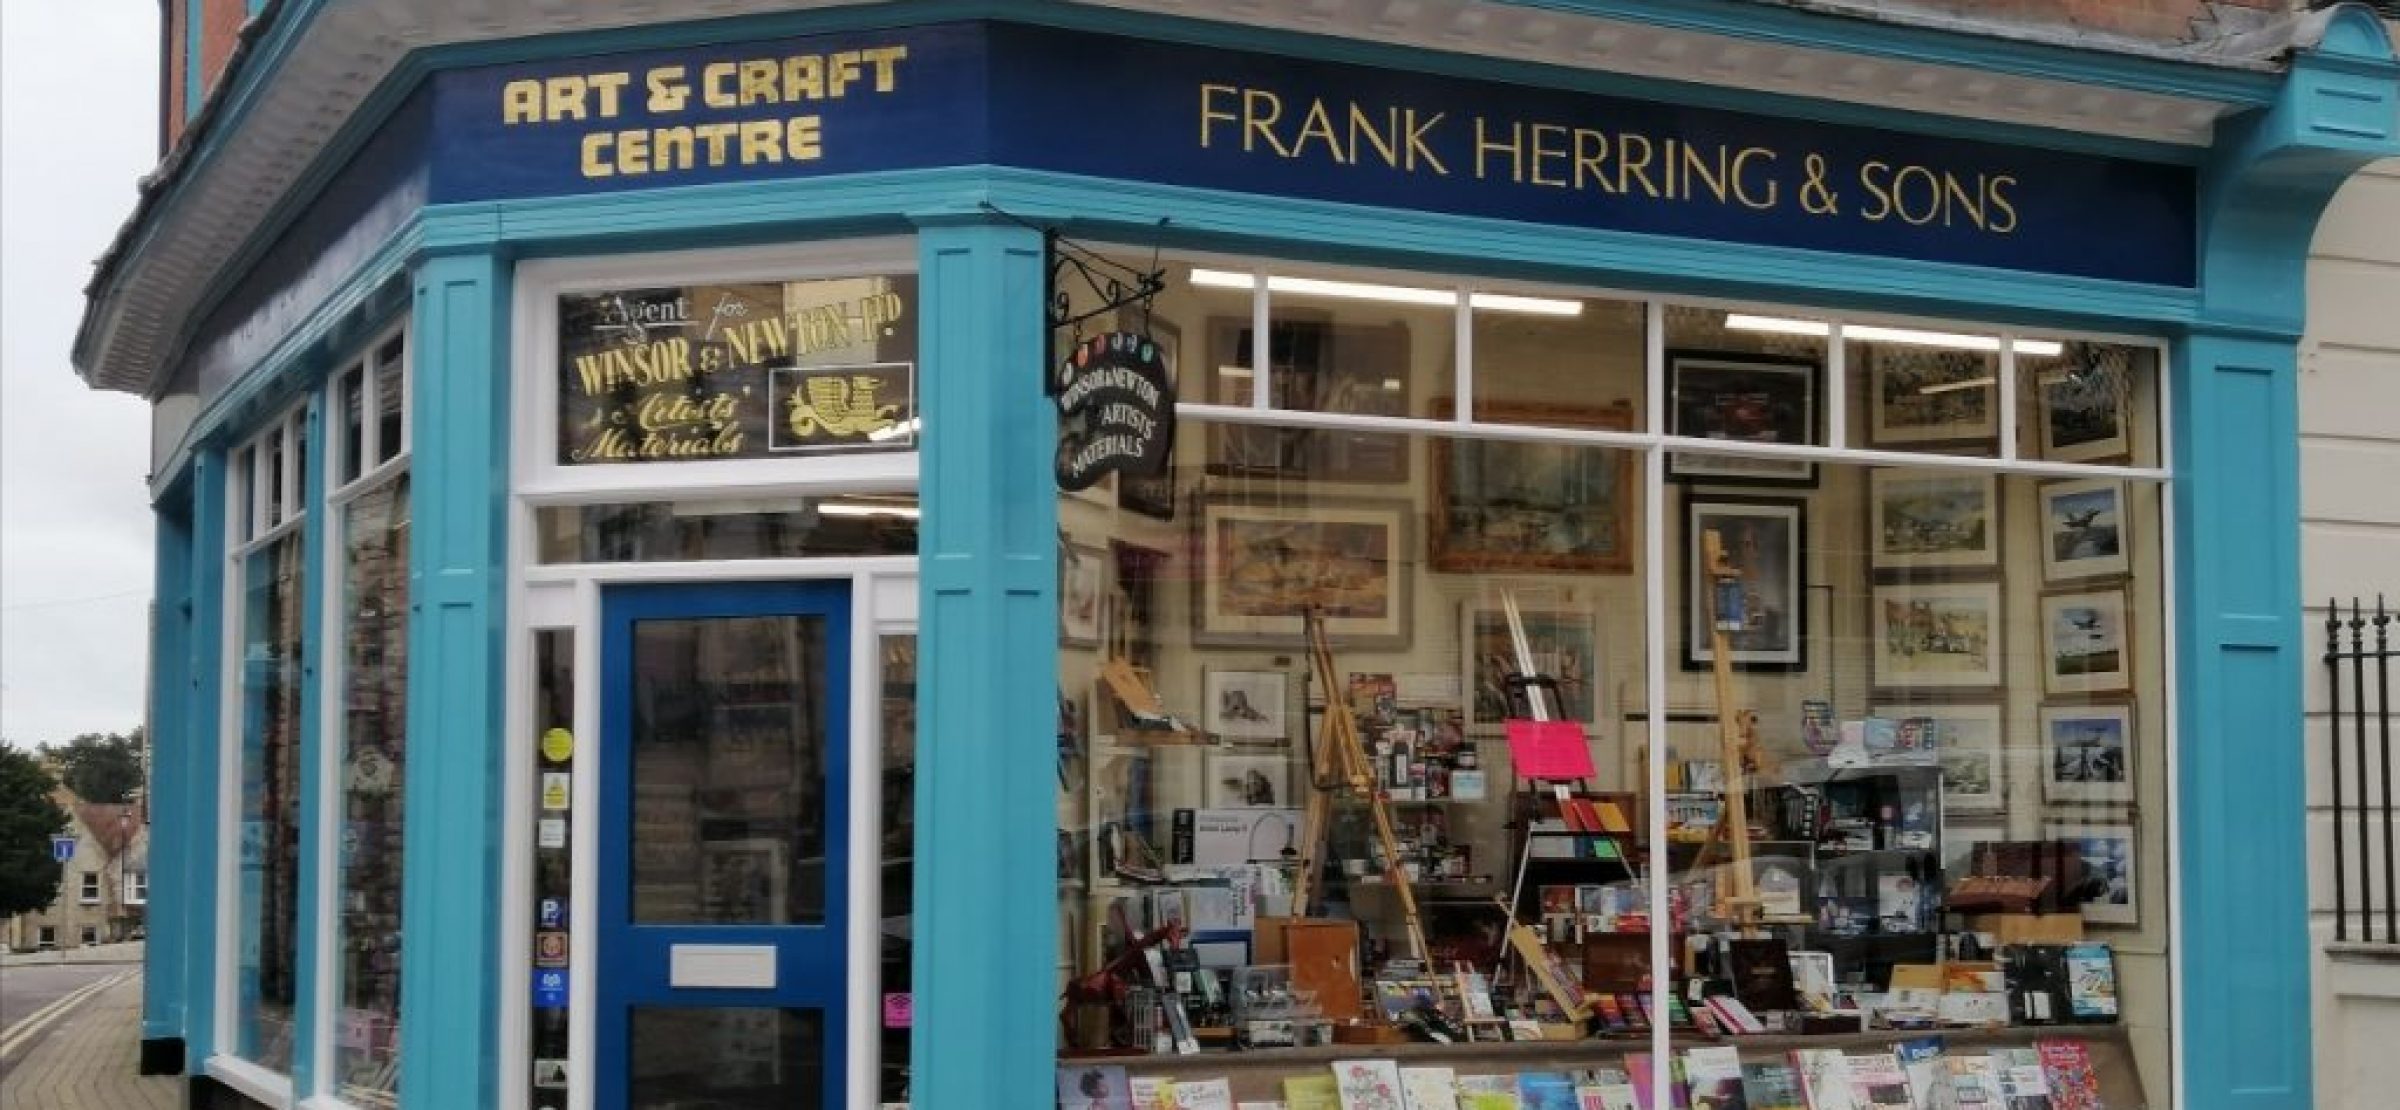 Frank Herring and Sons